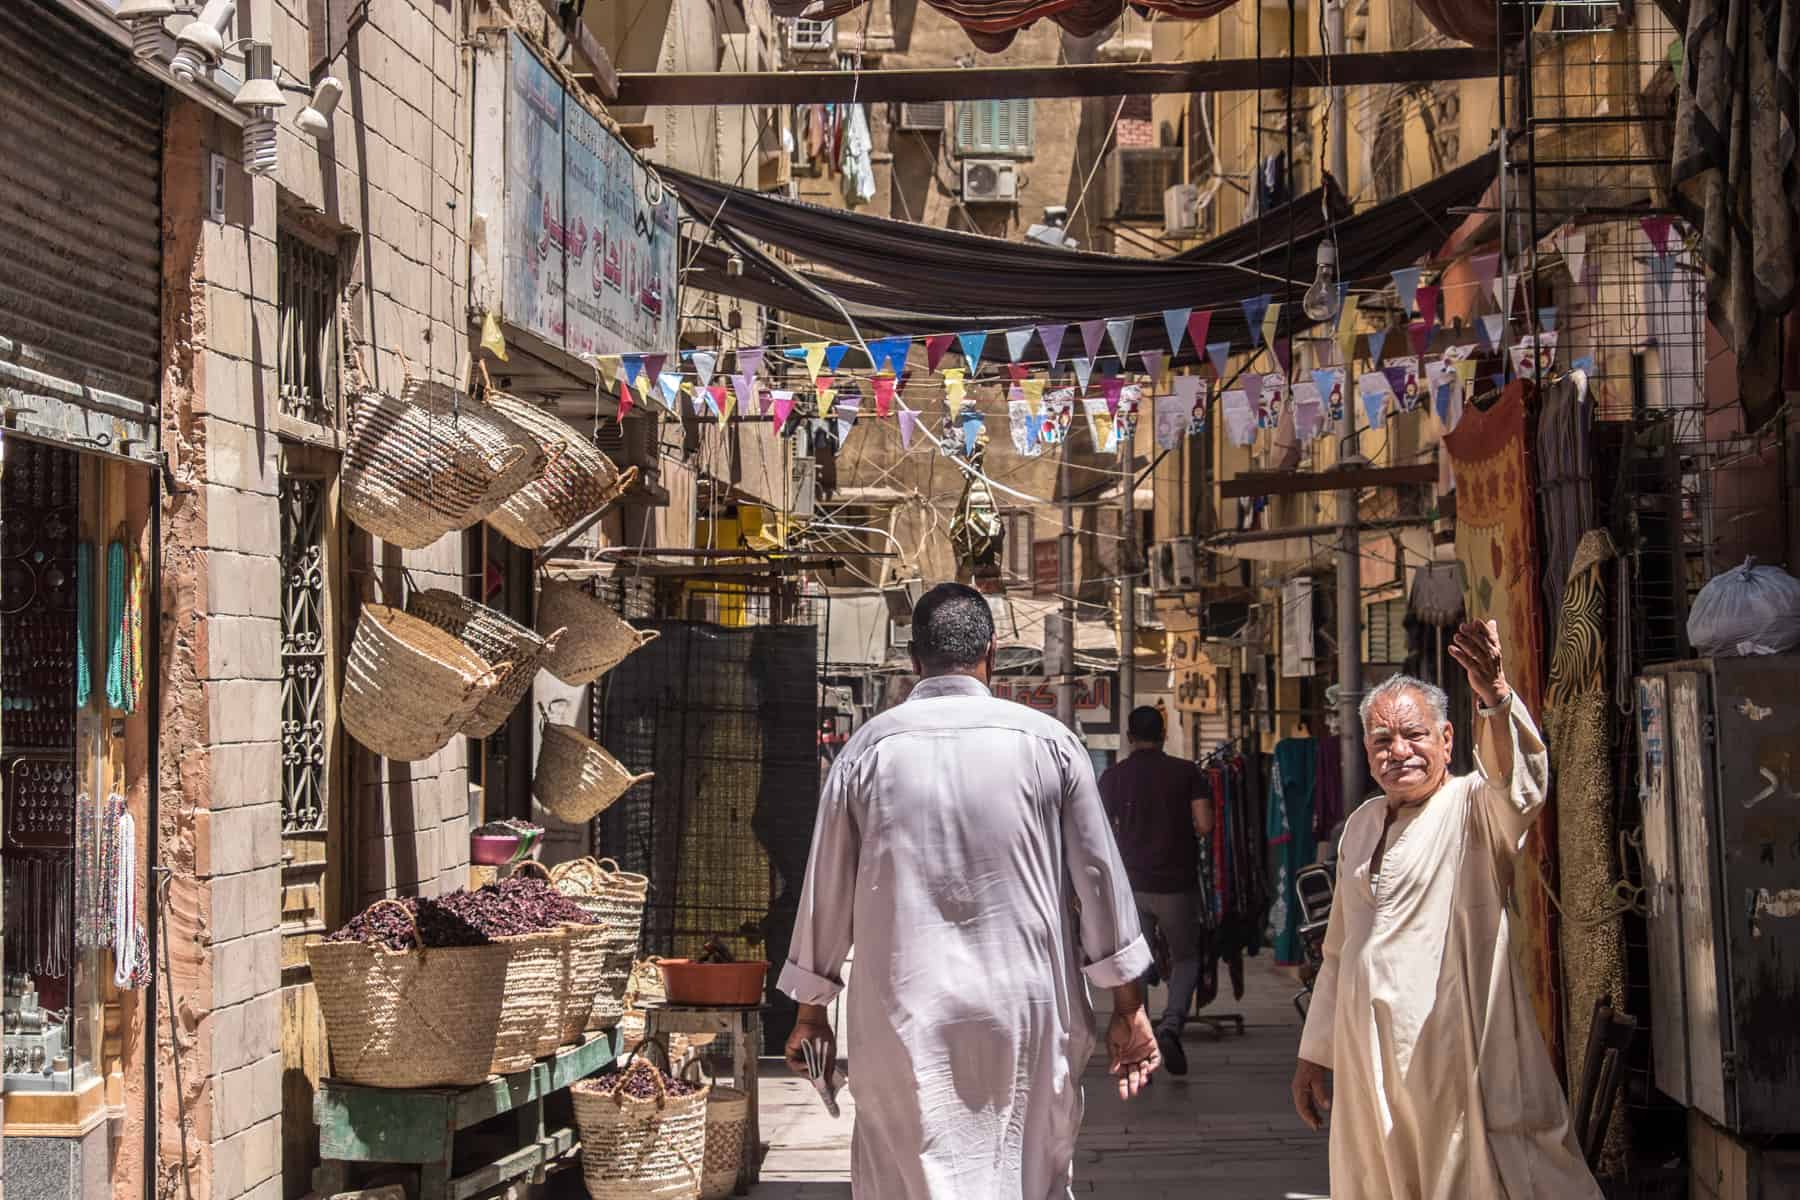 An older man in a white tunic waves in a souk in Aswan, Egypt. Behind him in a souk alleyway filled with shops whose doorways are lined with products